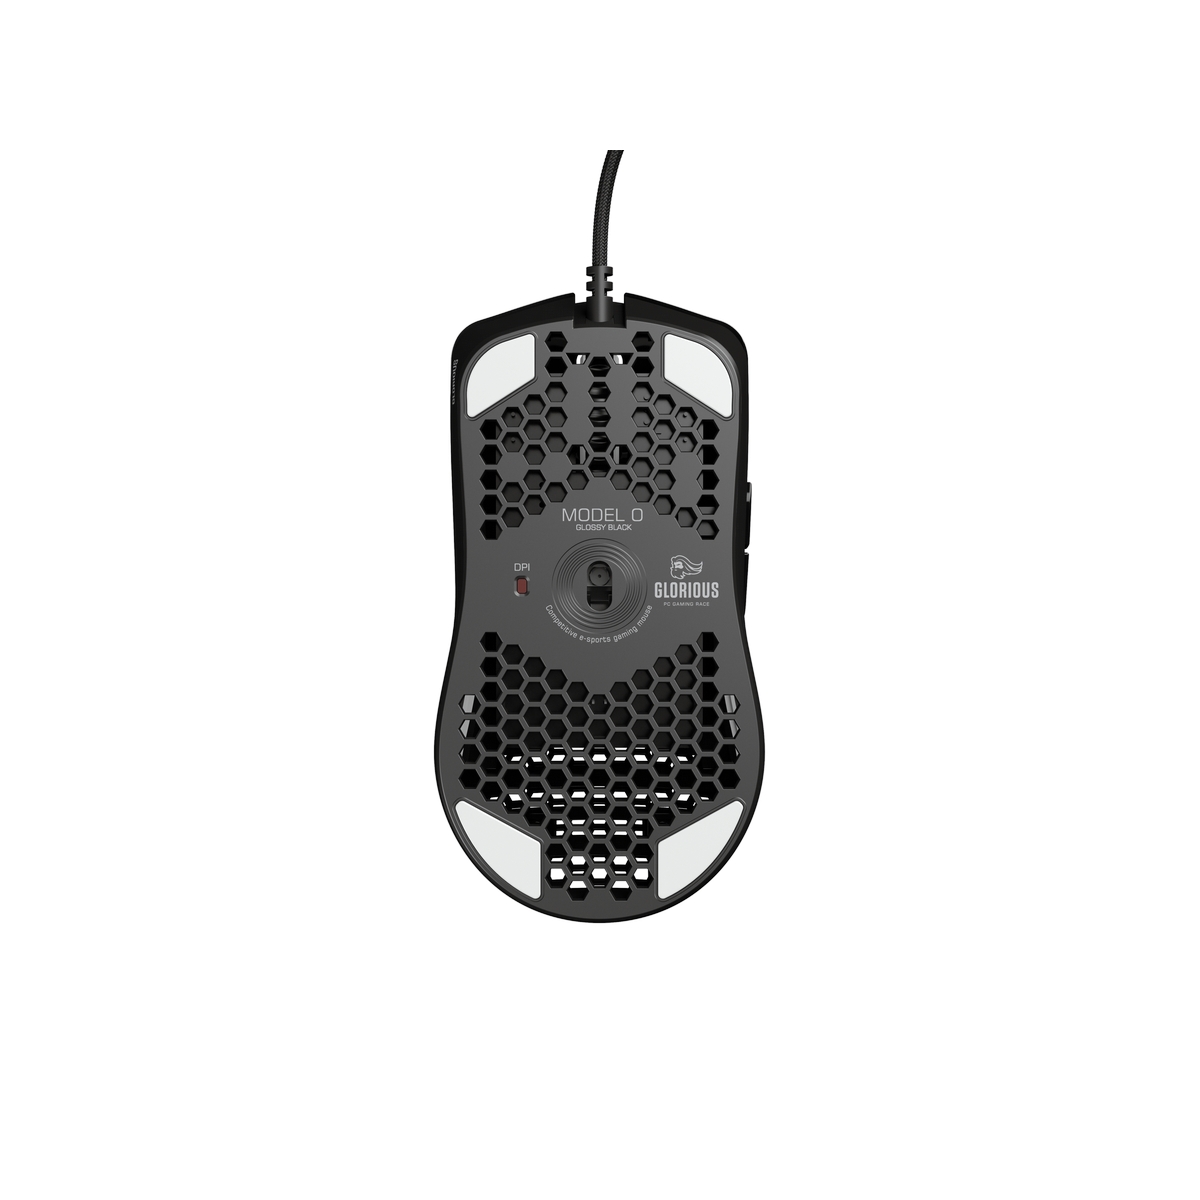 Glorious - Glorious Model O USB RGB Odin Gaming Mouse - Glossy Black (GO-GBLACK)